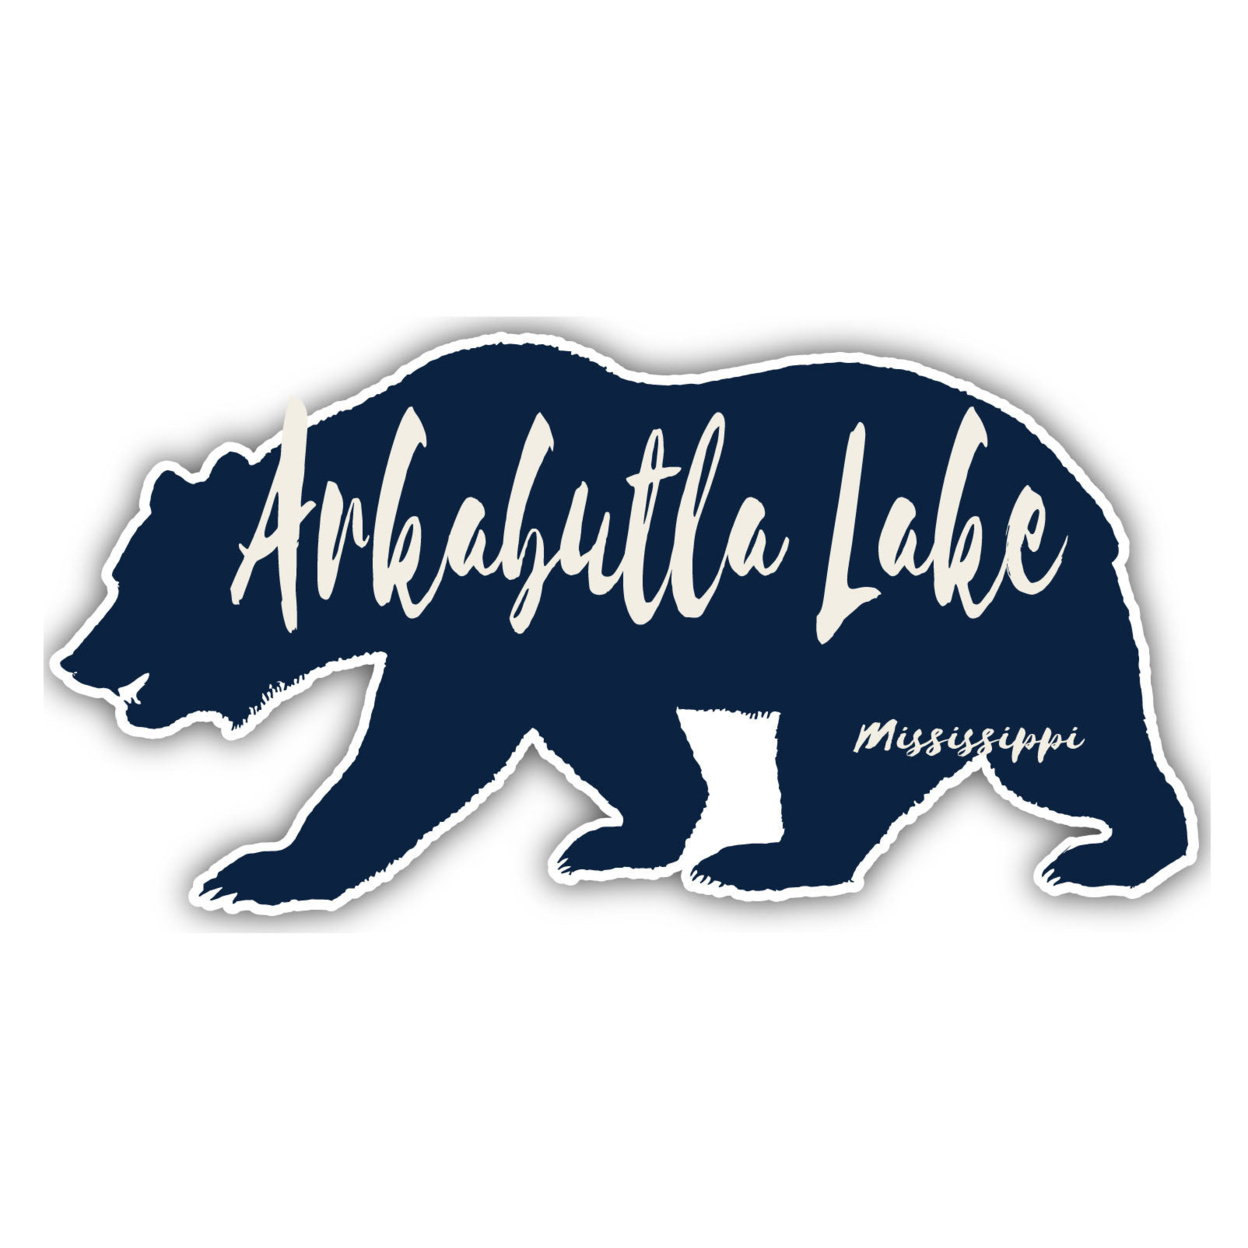 Arkabutla Lake Mississippi Souvenir Decorative Stickers (Choose Theme And Size) - 4-Pack, 6-Inch, Bear